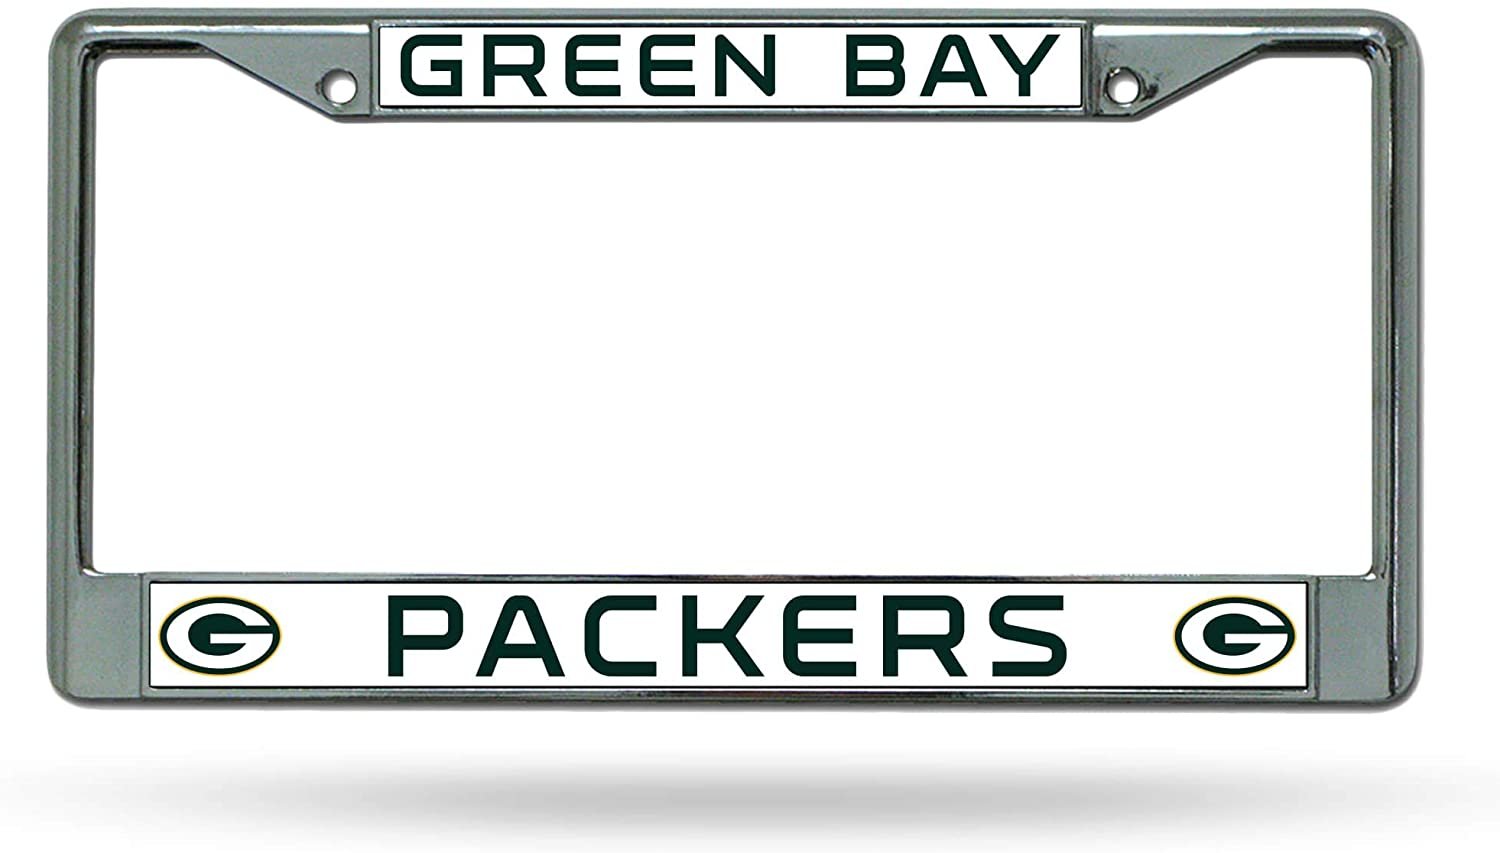 Green Bay Packers Premium Metal License Plate Frame Chrome Tag Cover, 12x6 Inch